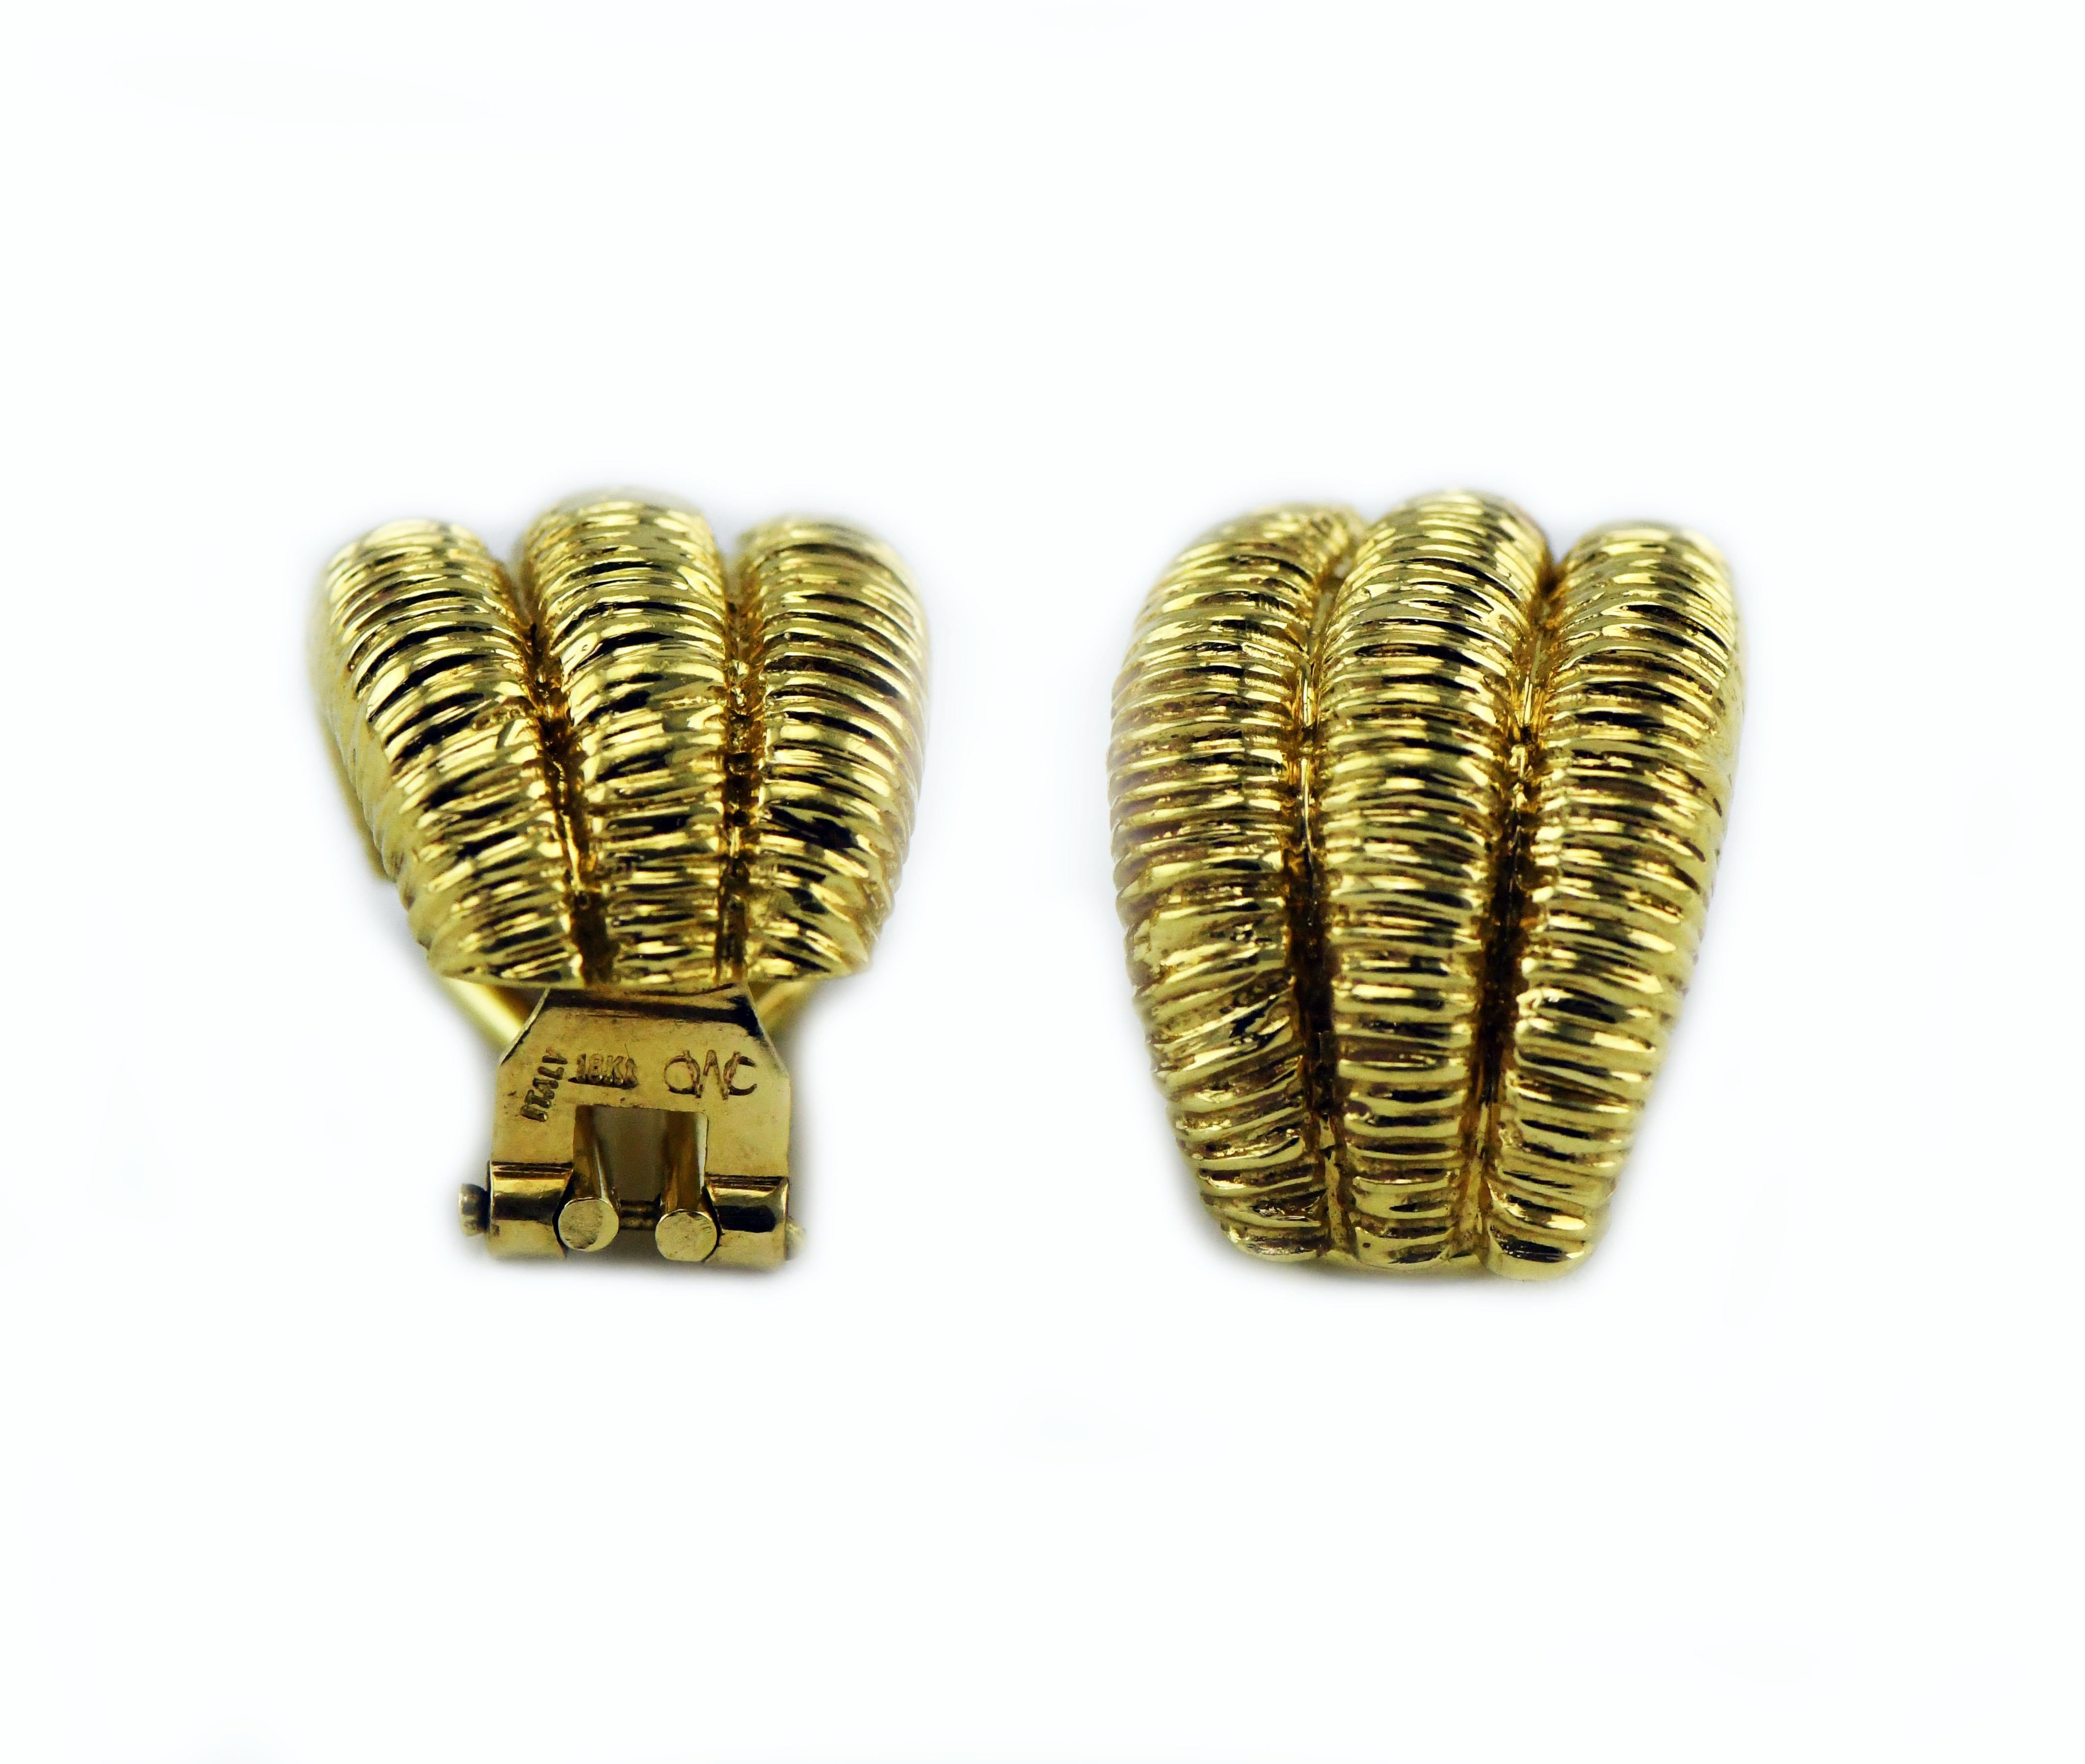 1980s Signed OWC 18k Solid Gold Italian Earrings. These beautiful vintage 18 karat solid yellow gold earrings are stamped OWC and dates the 1980s. OWC was founded in 1977 in Italy.